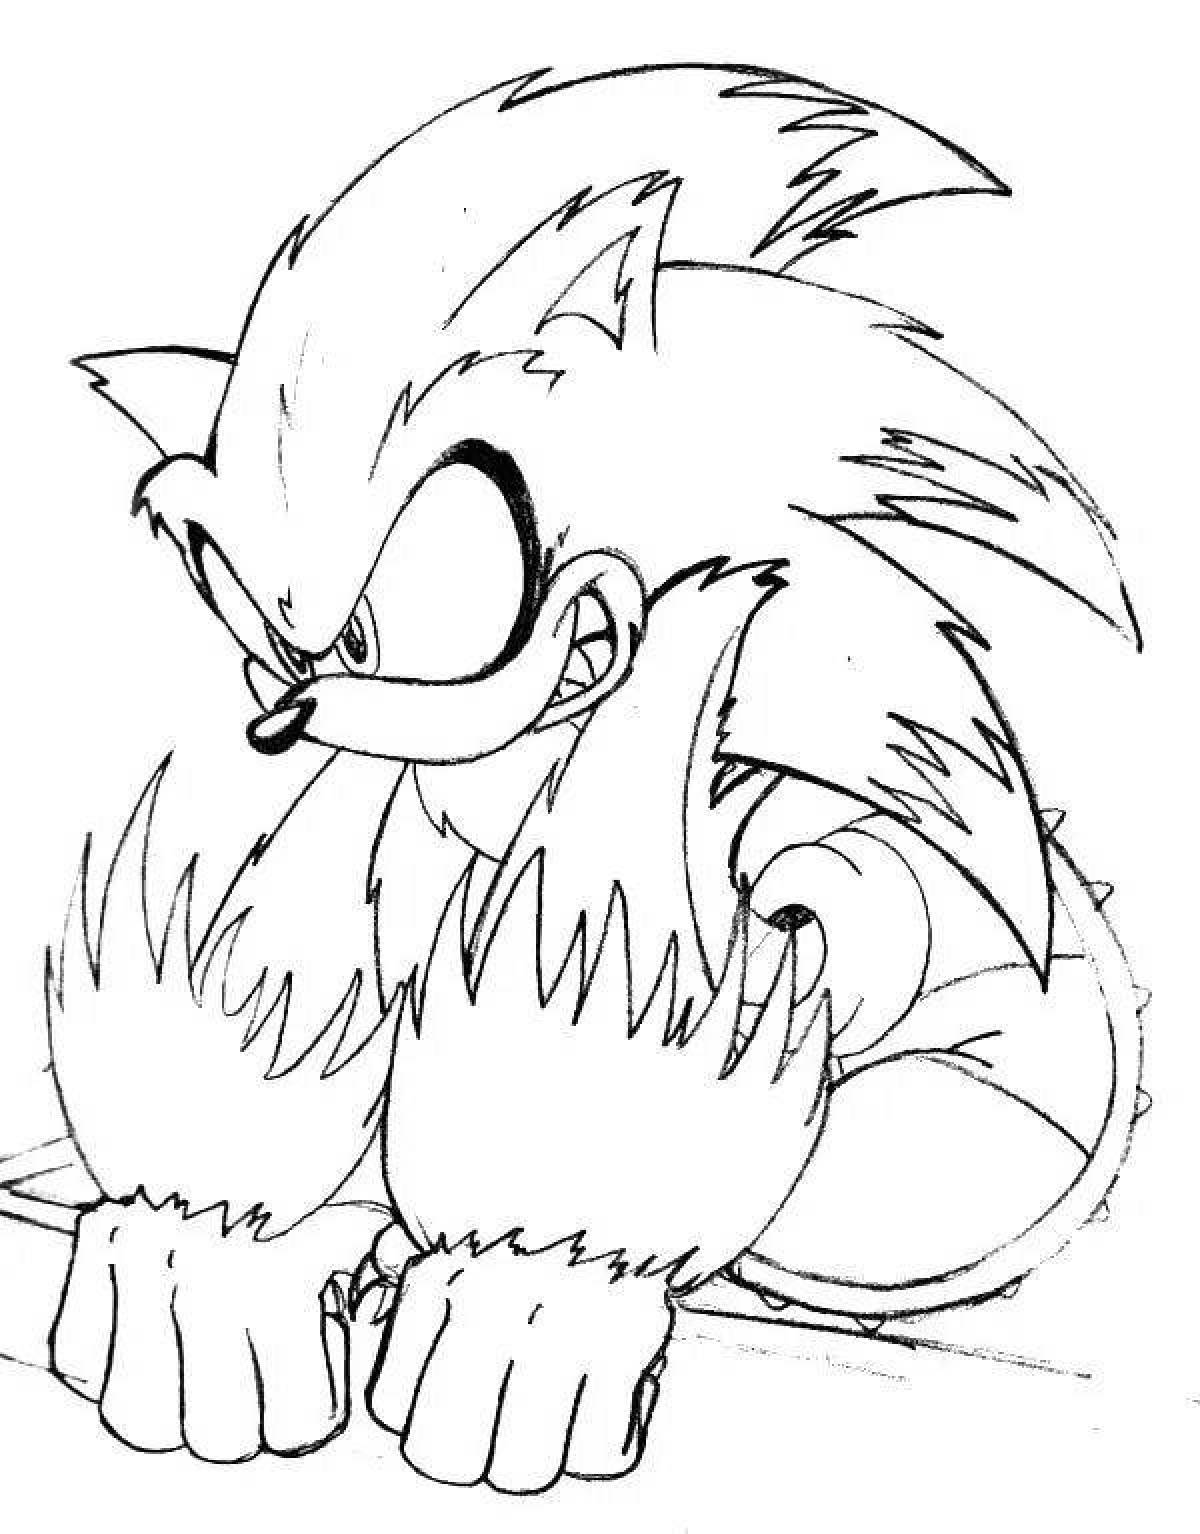 Sonic werewolf dazzling coloring book